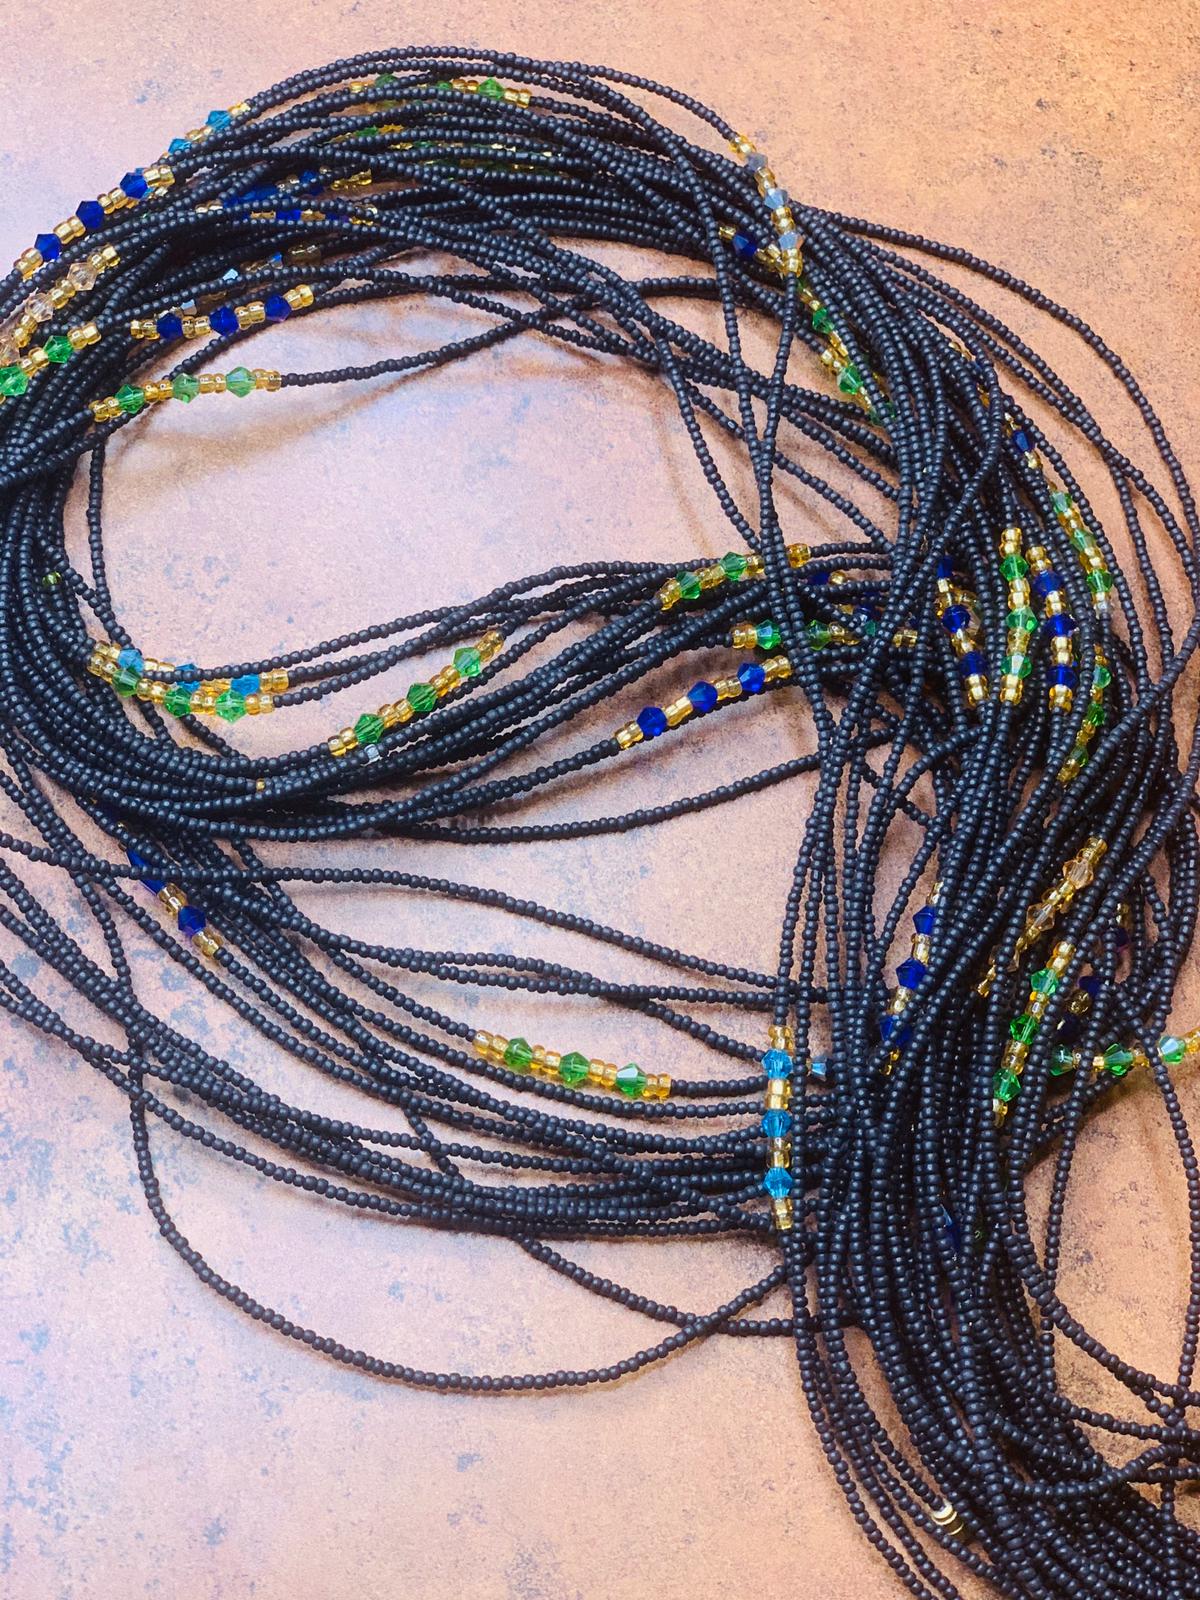 48 Inches Micro Blue Black Beads With Gold, Blue And Green Pebble Bar Removable Screw Waist Beads